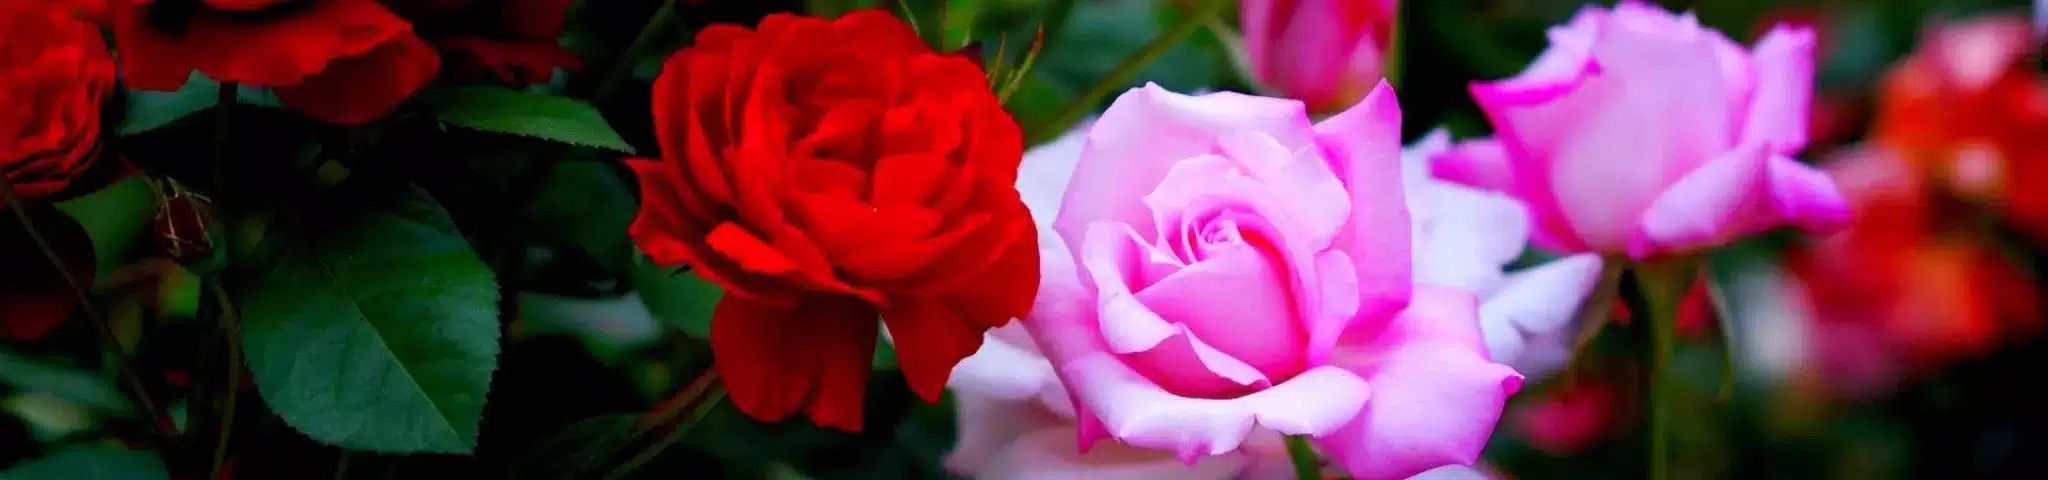 Red and Pink Rose Flower